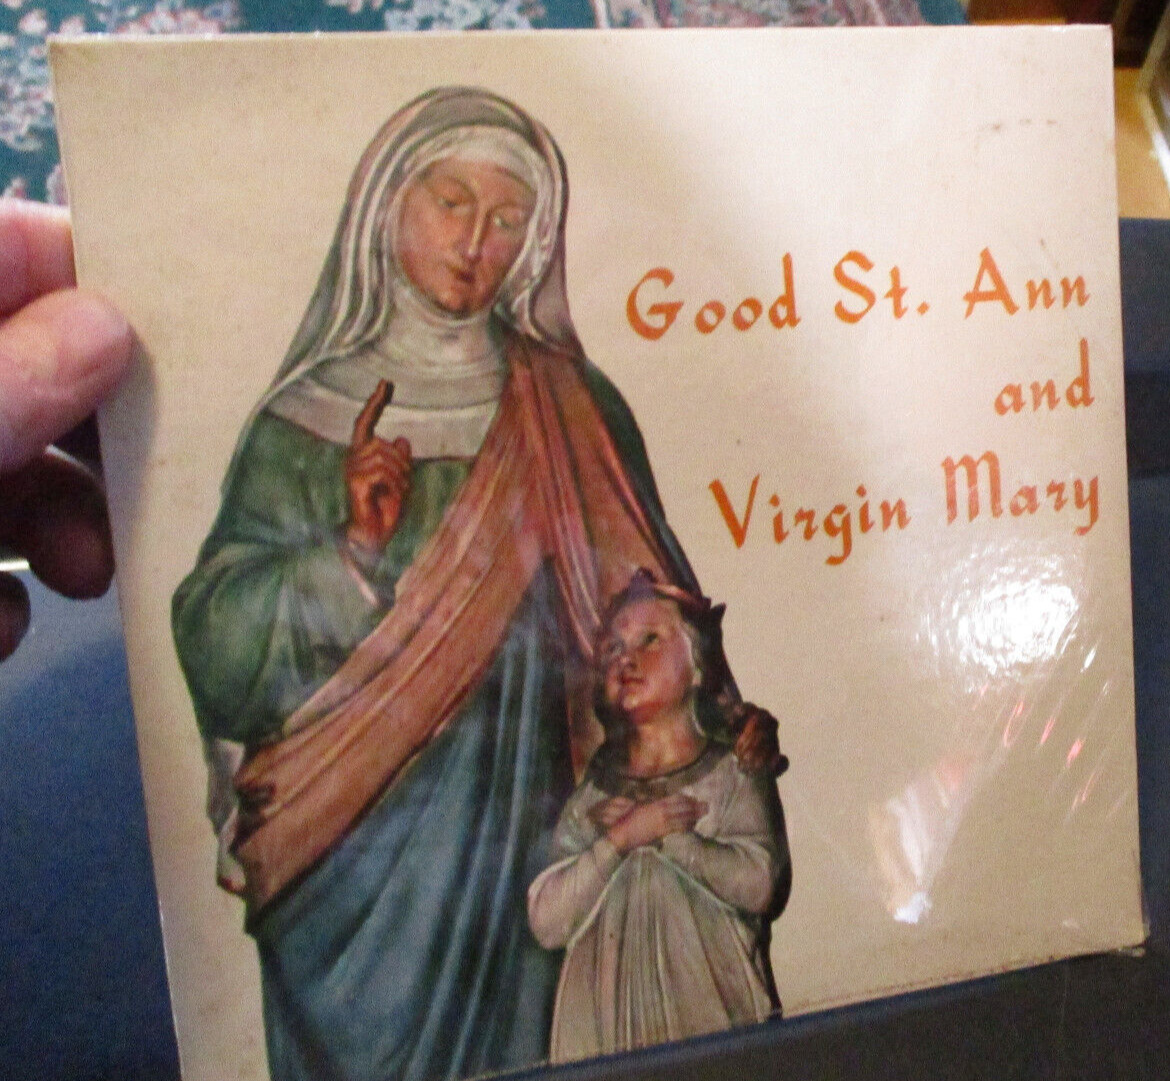 Good St. Ann And Virgin Mary No. 709 45 RPM High Fidelity Religious Record  1962